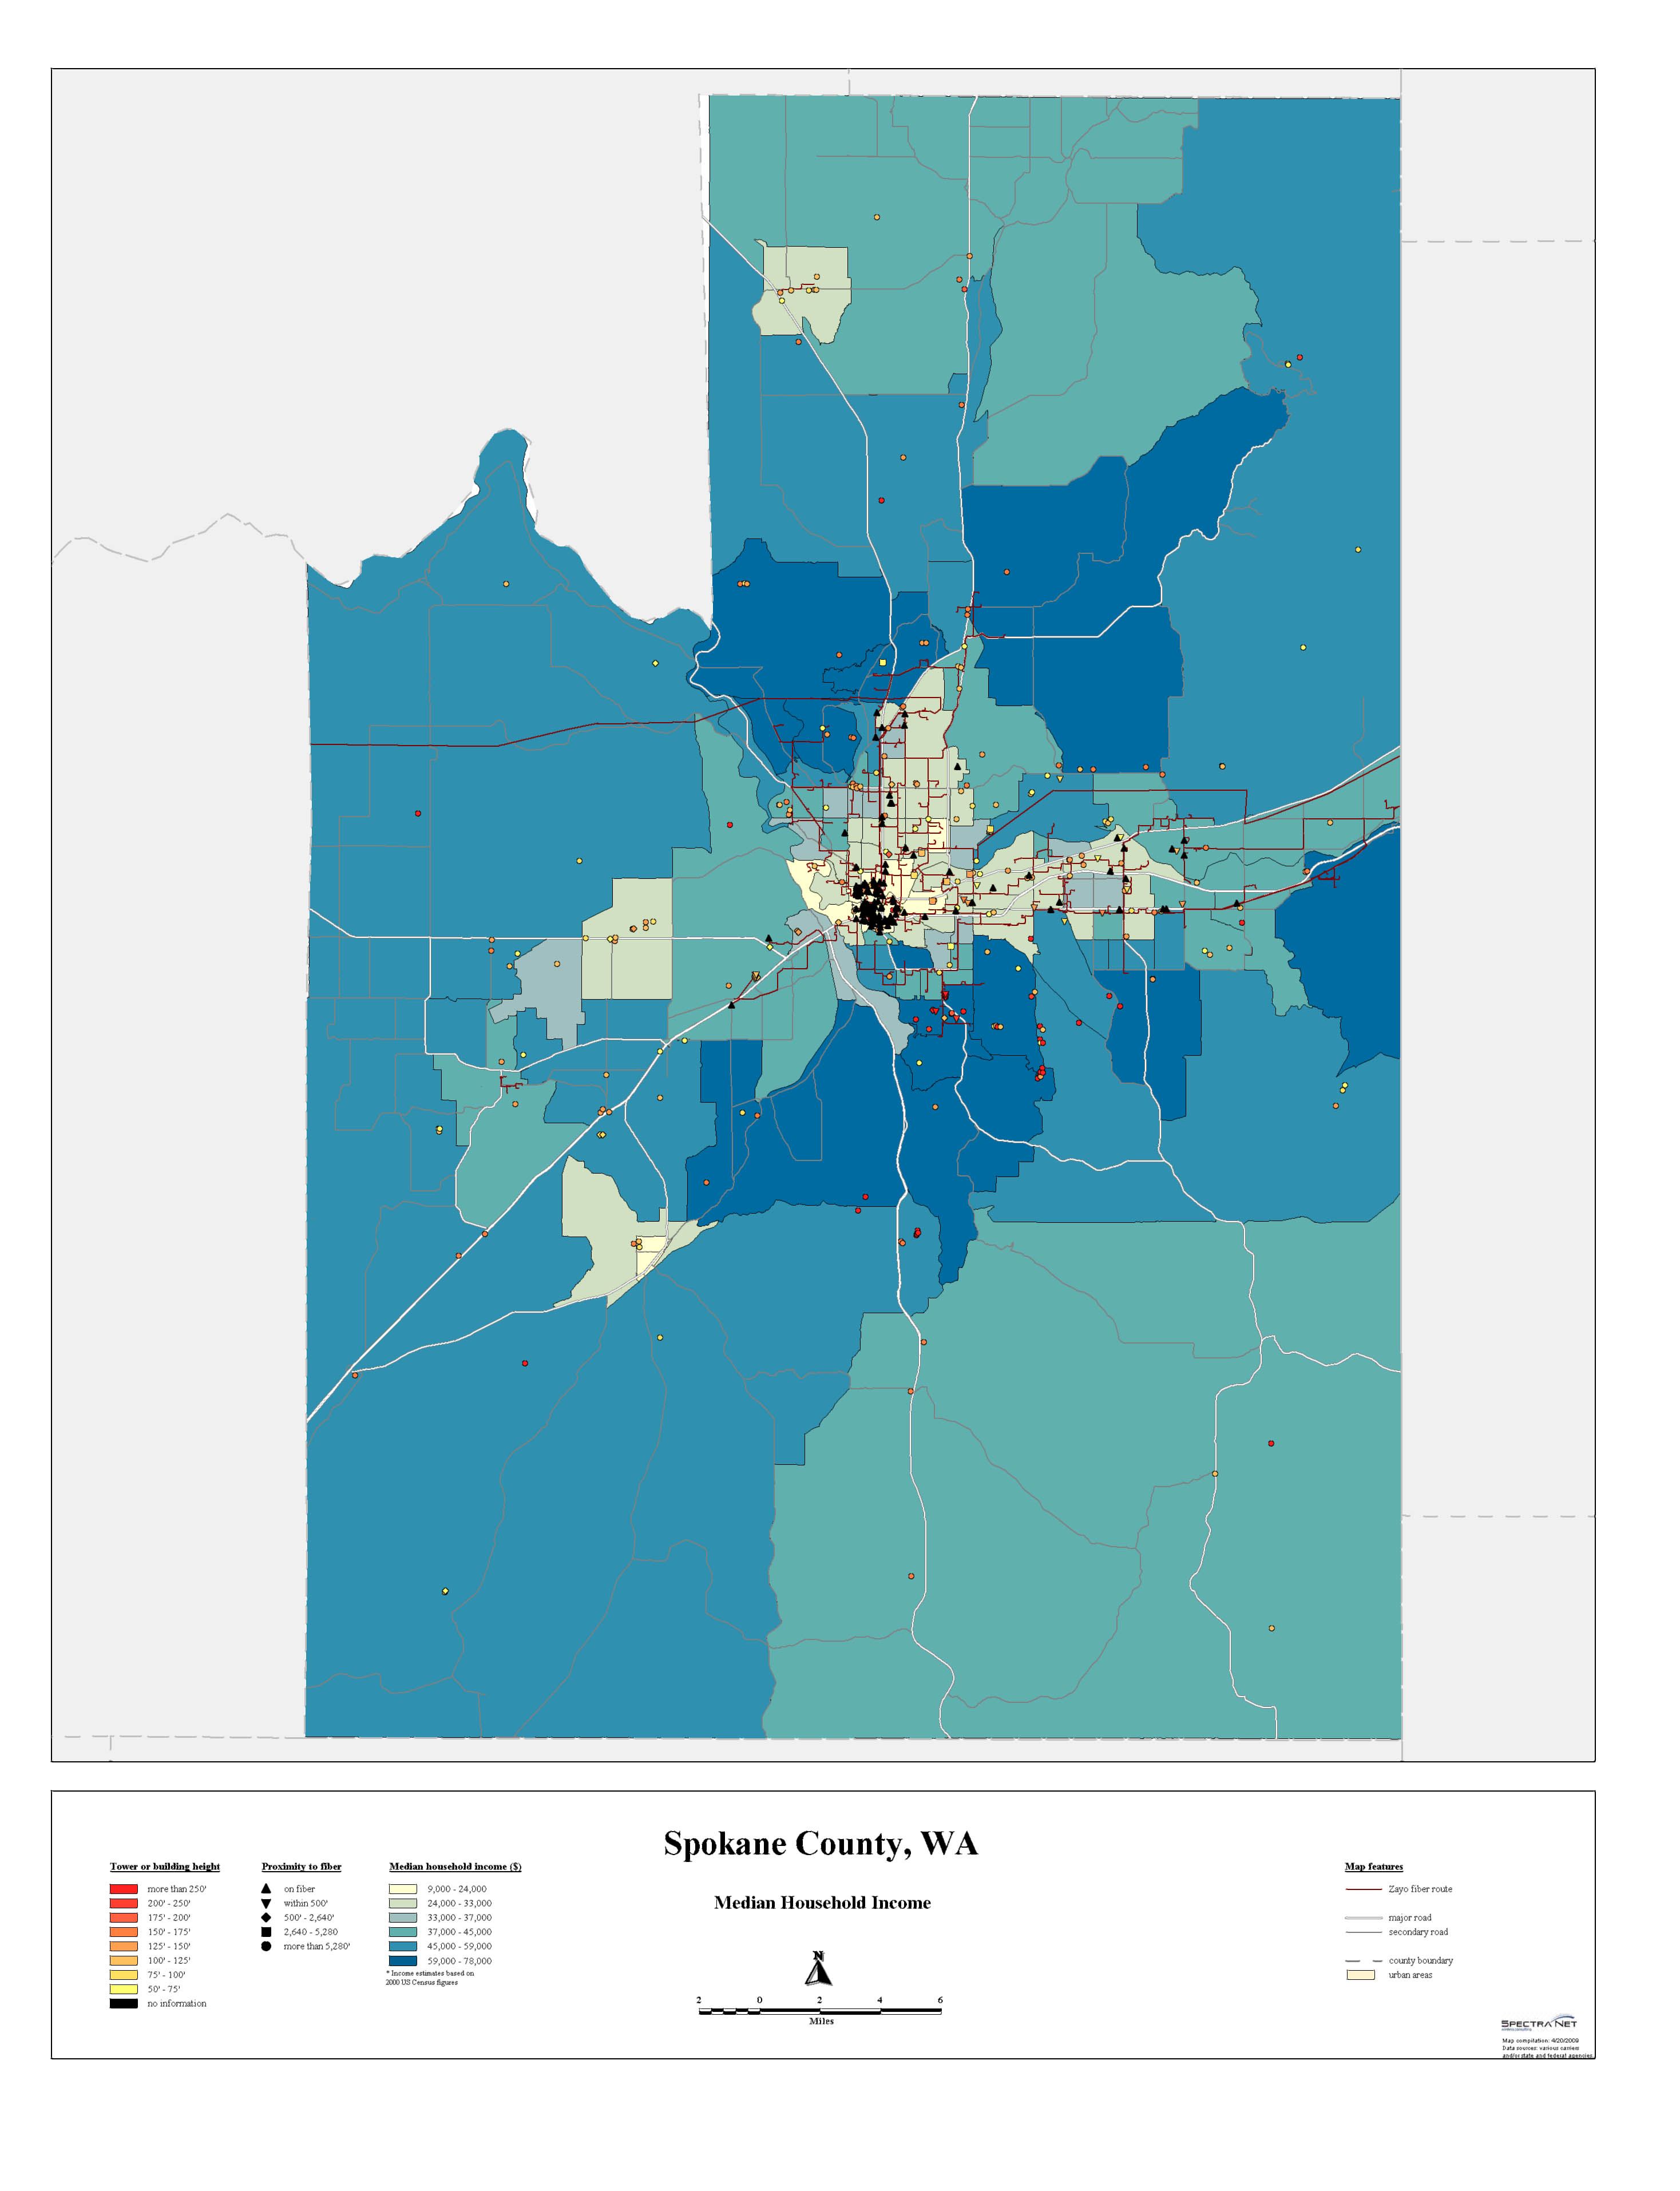 GIS mapping of income using MapInfo